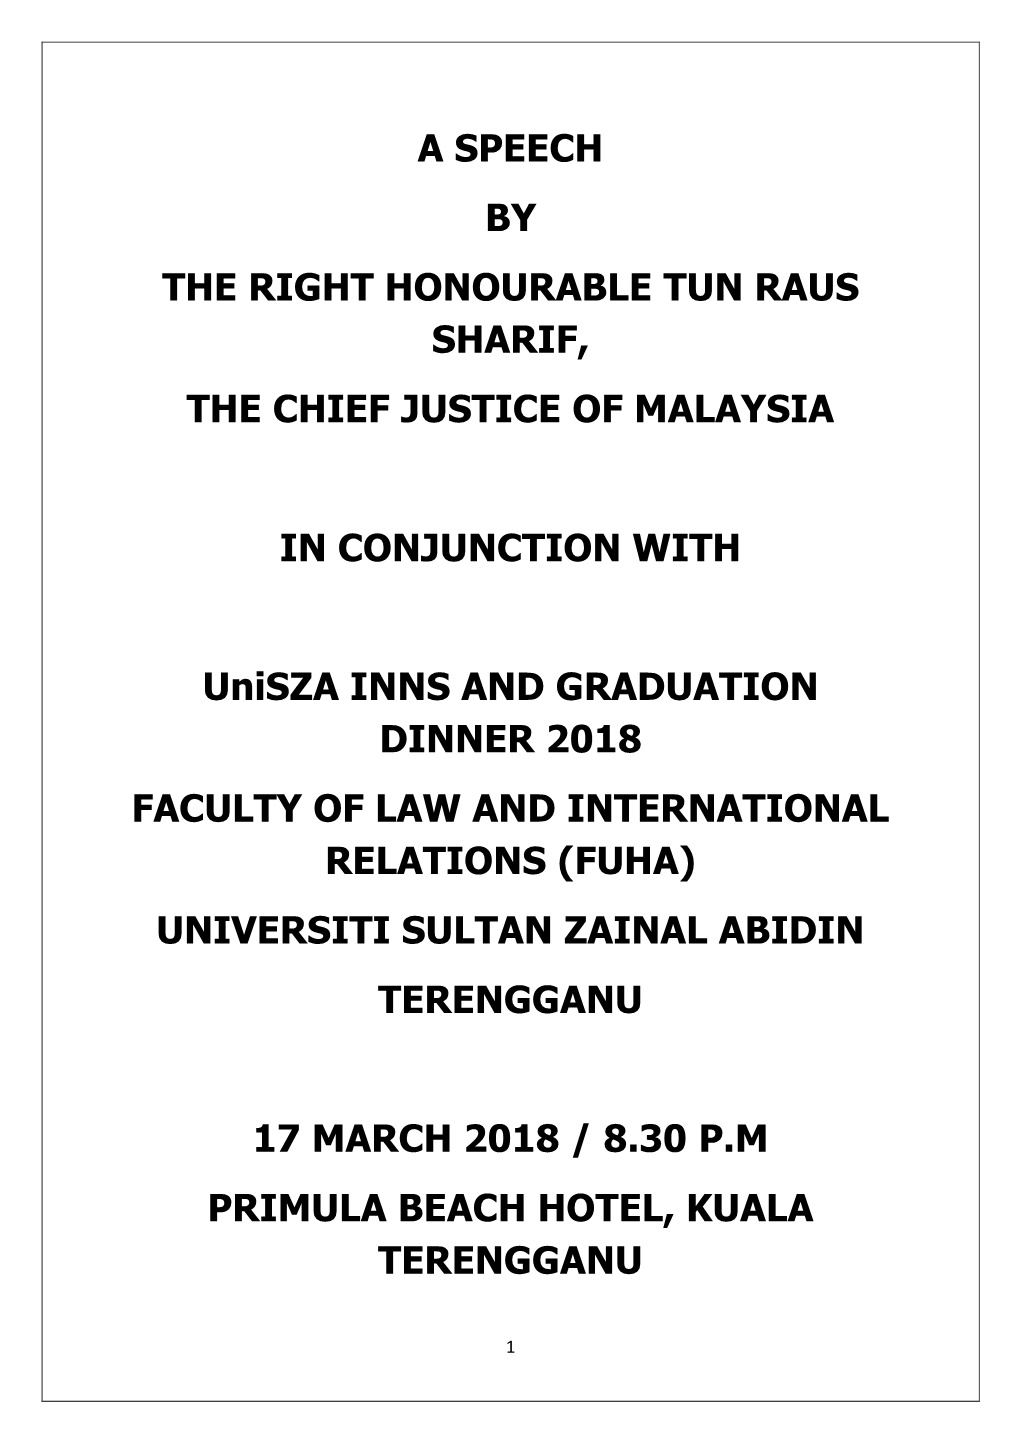 A Speech by the Right Honourable Tun Raus Sharif, the Chief Justice of Malaysia